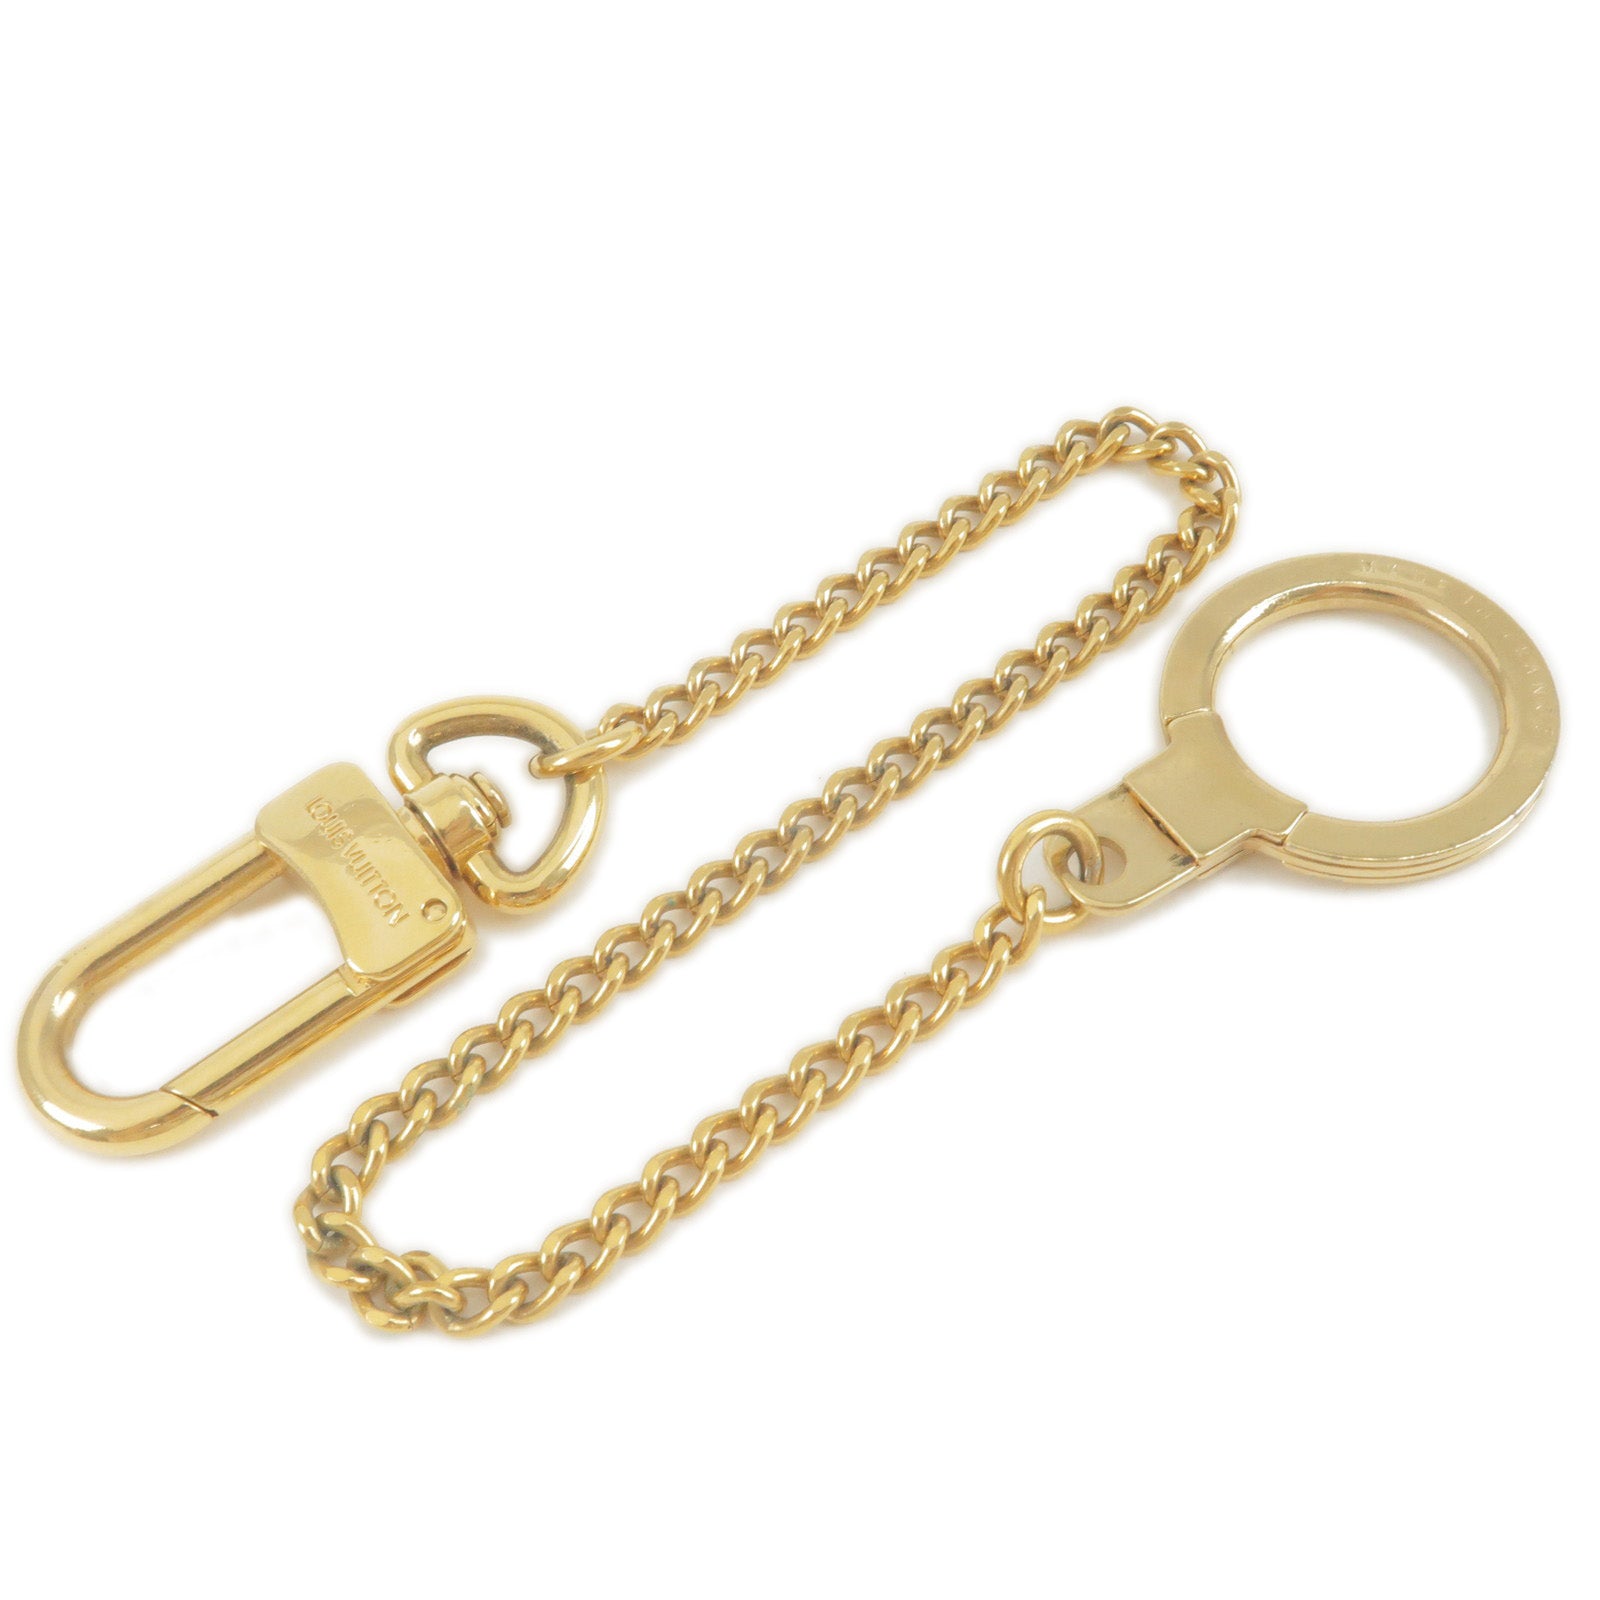 Authentic-Louis-Vuitton-Chenne-Ano-Cles-Key-Chain-Key-Charm-Gold-M58021-Used-F/S  – dct-ep_vintage luxury Store